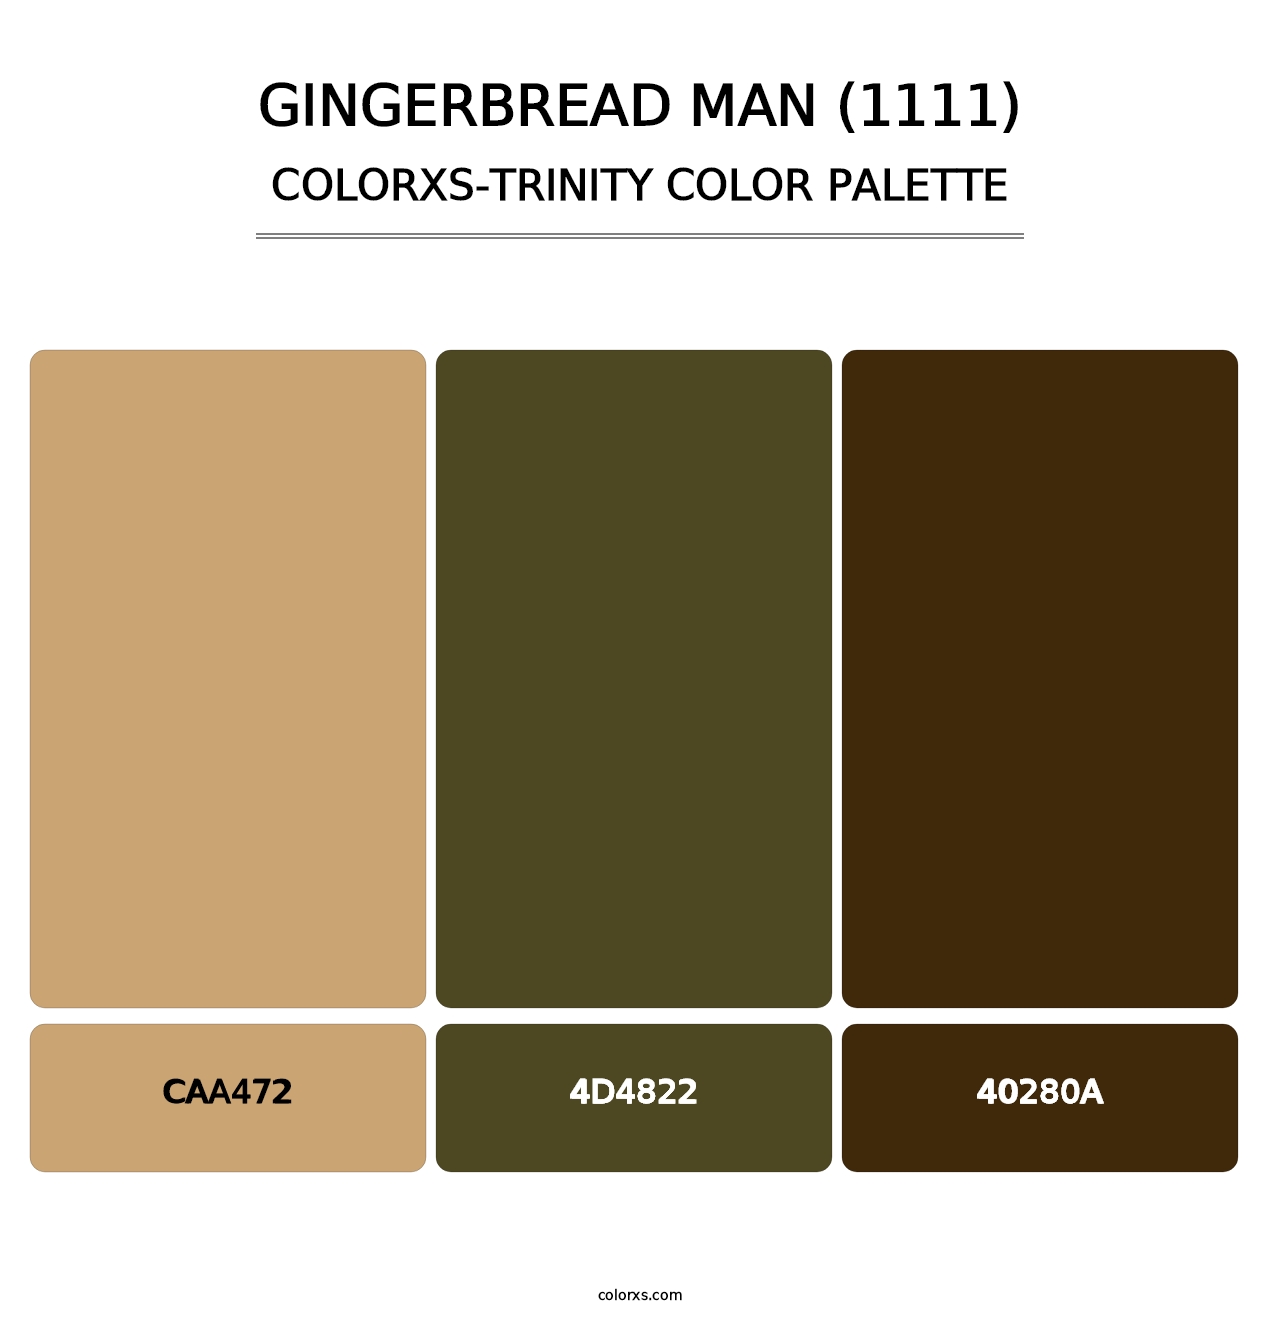 Gingerbread Man (1111) - Colorxs Trinity Palette